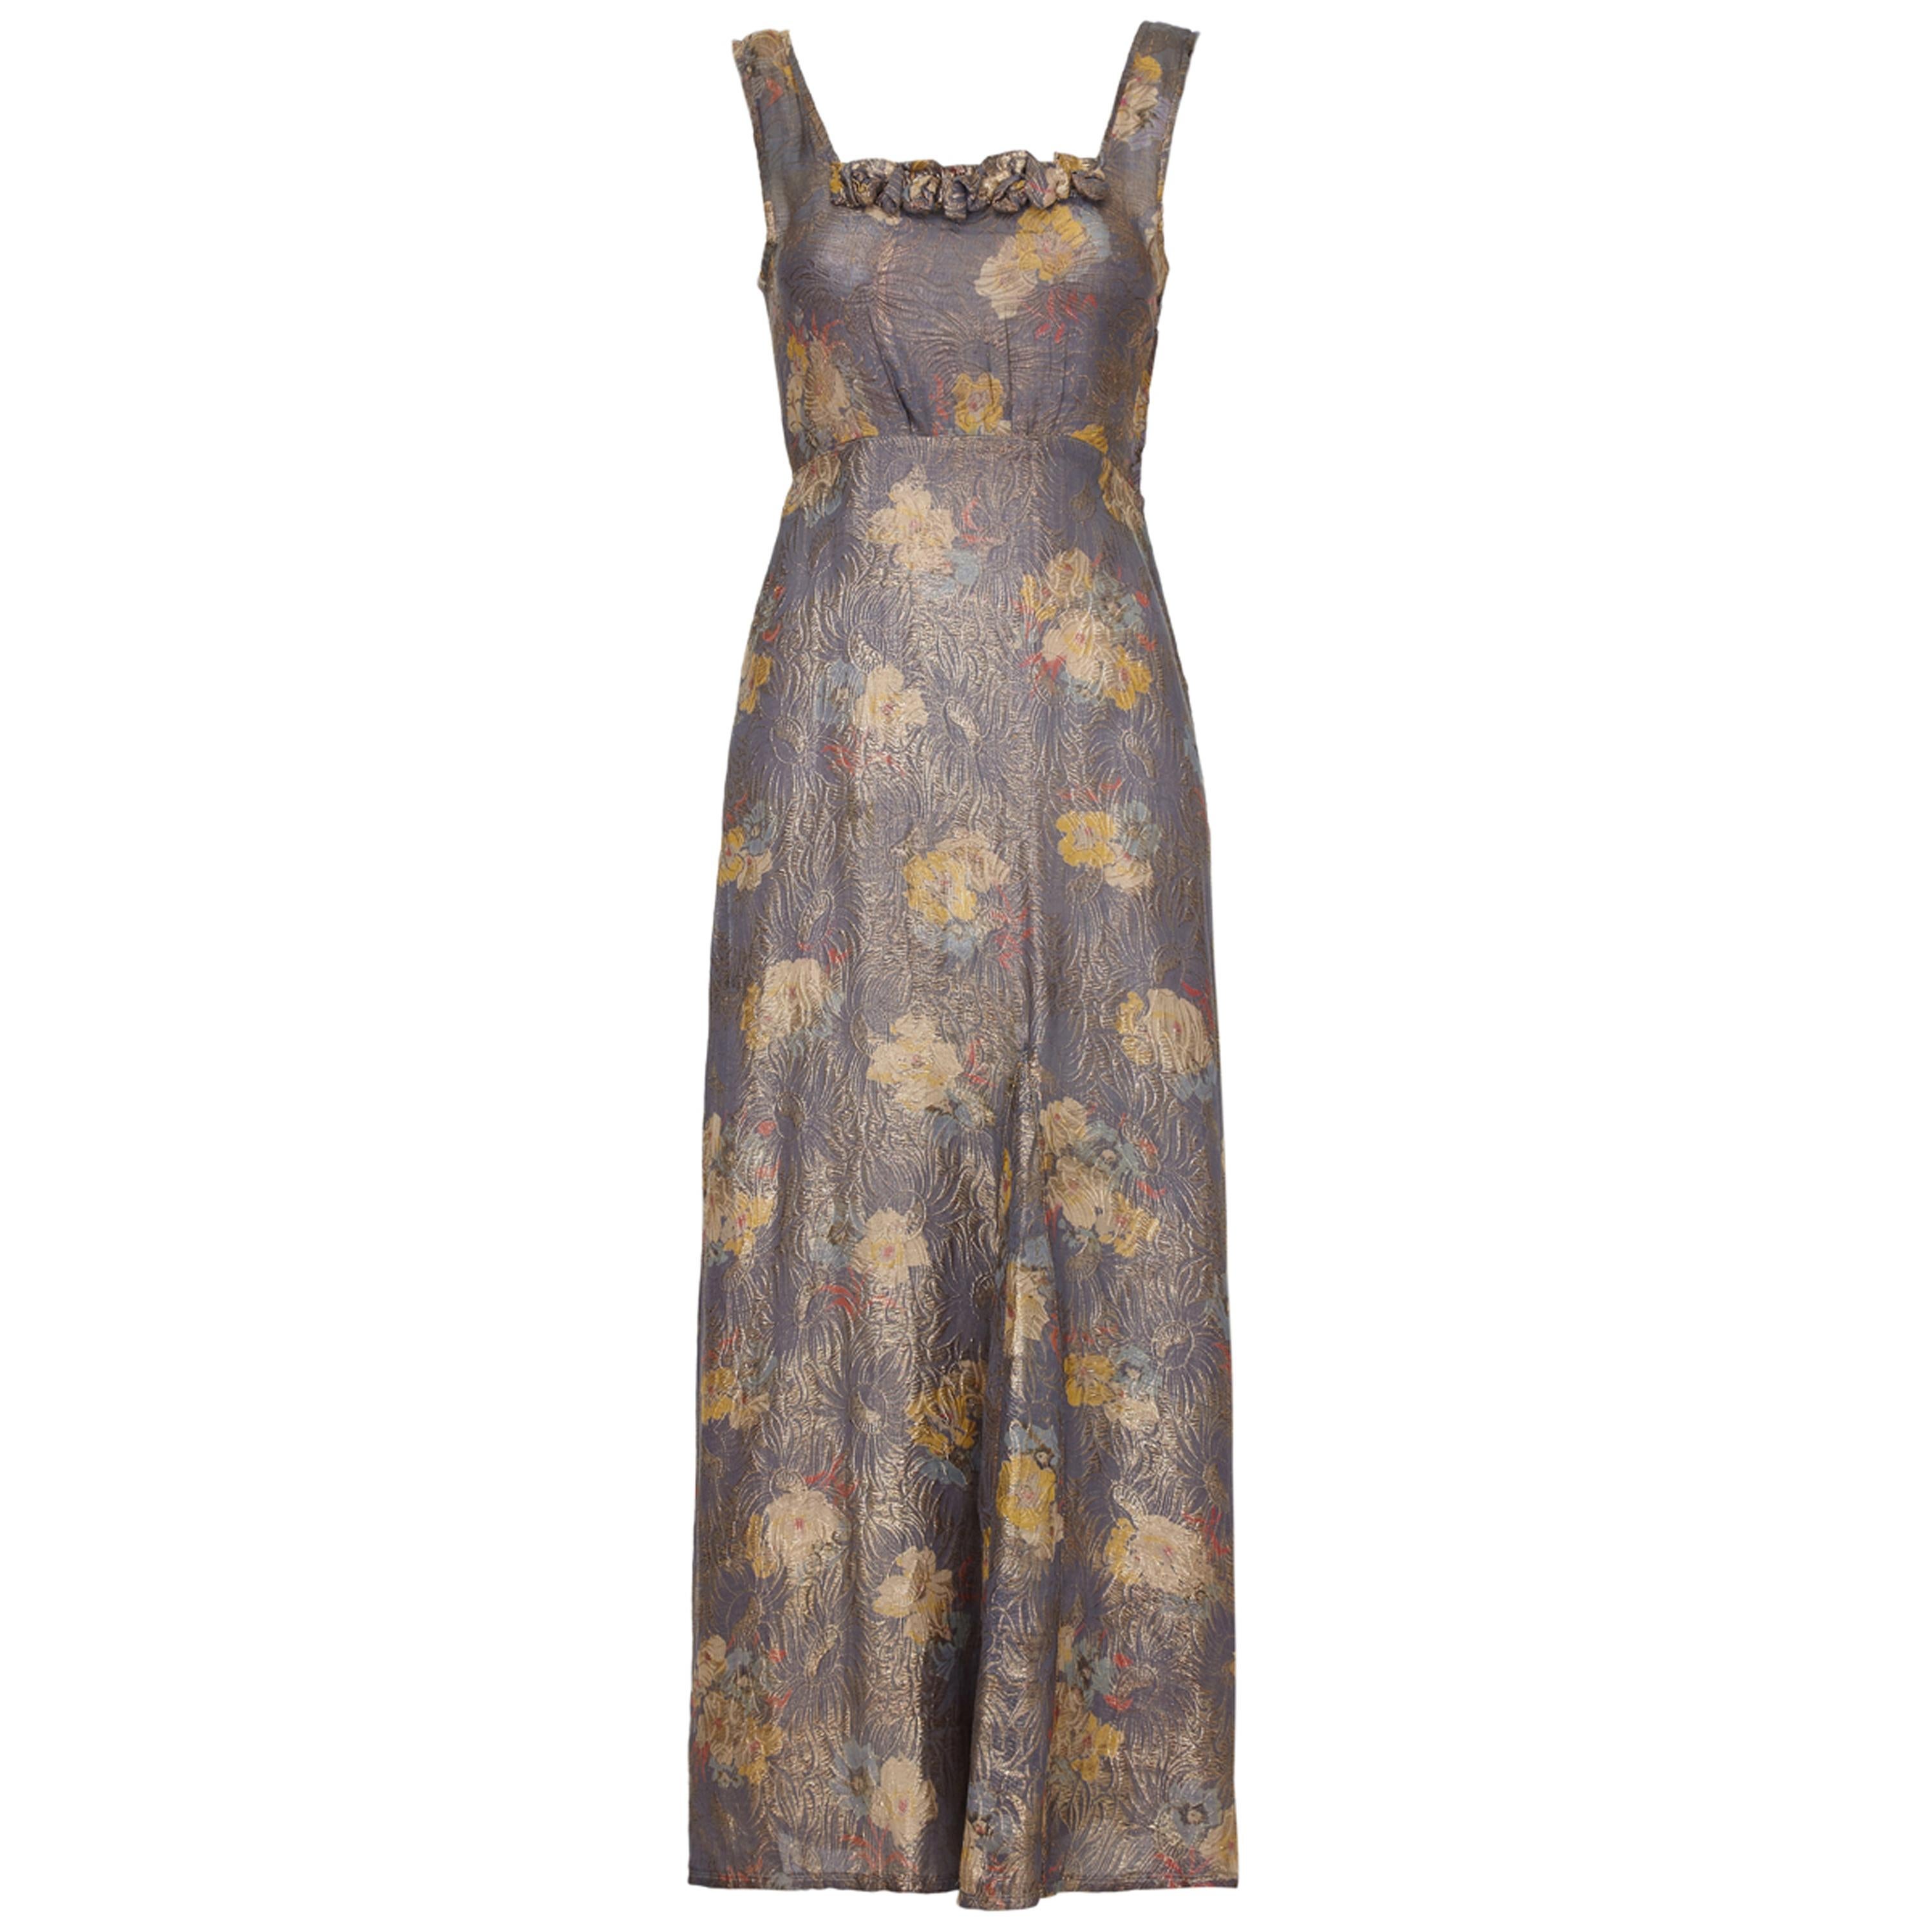 1930s Grey and Gold Lame Floral Print Dress